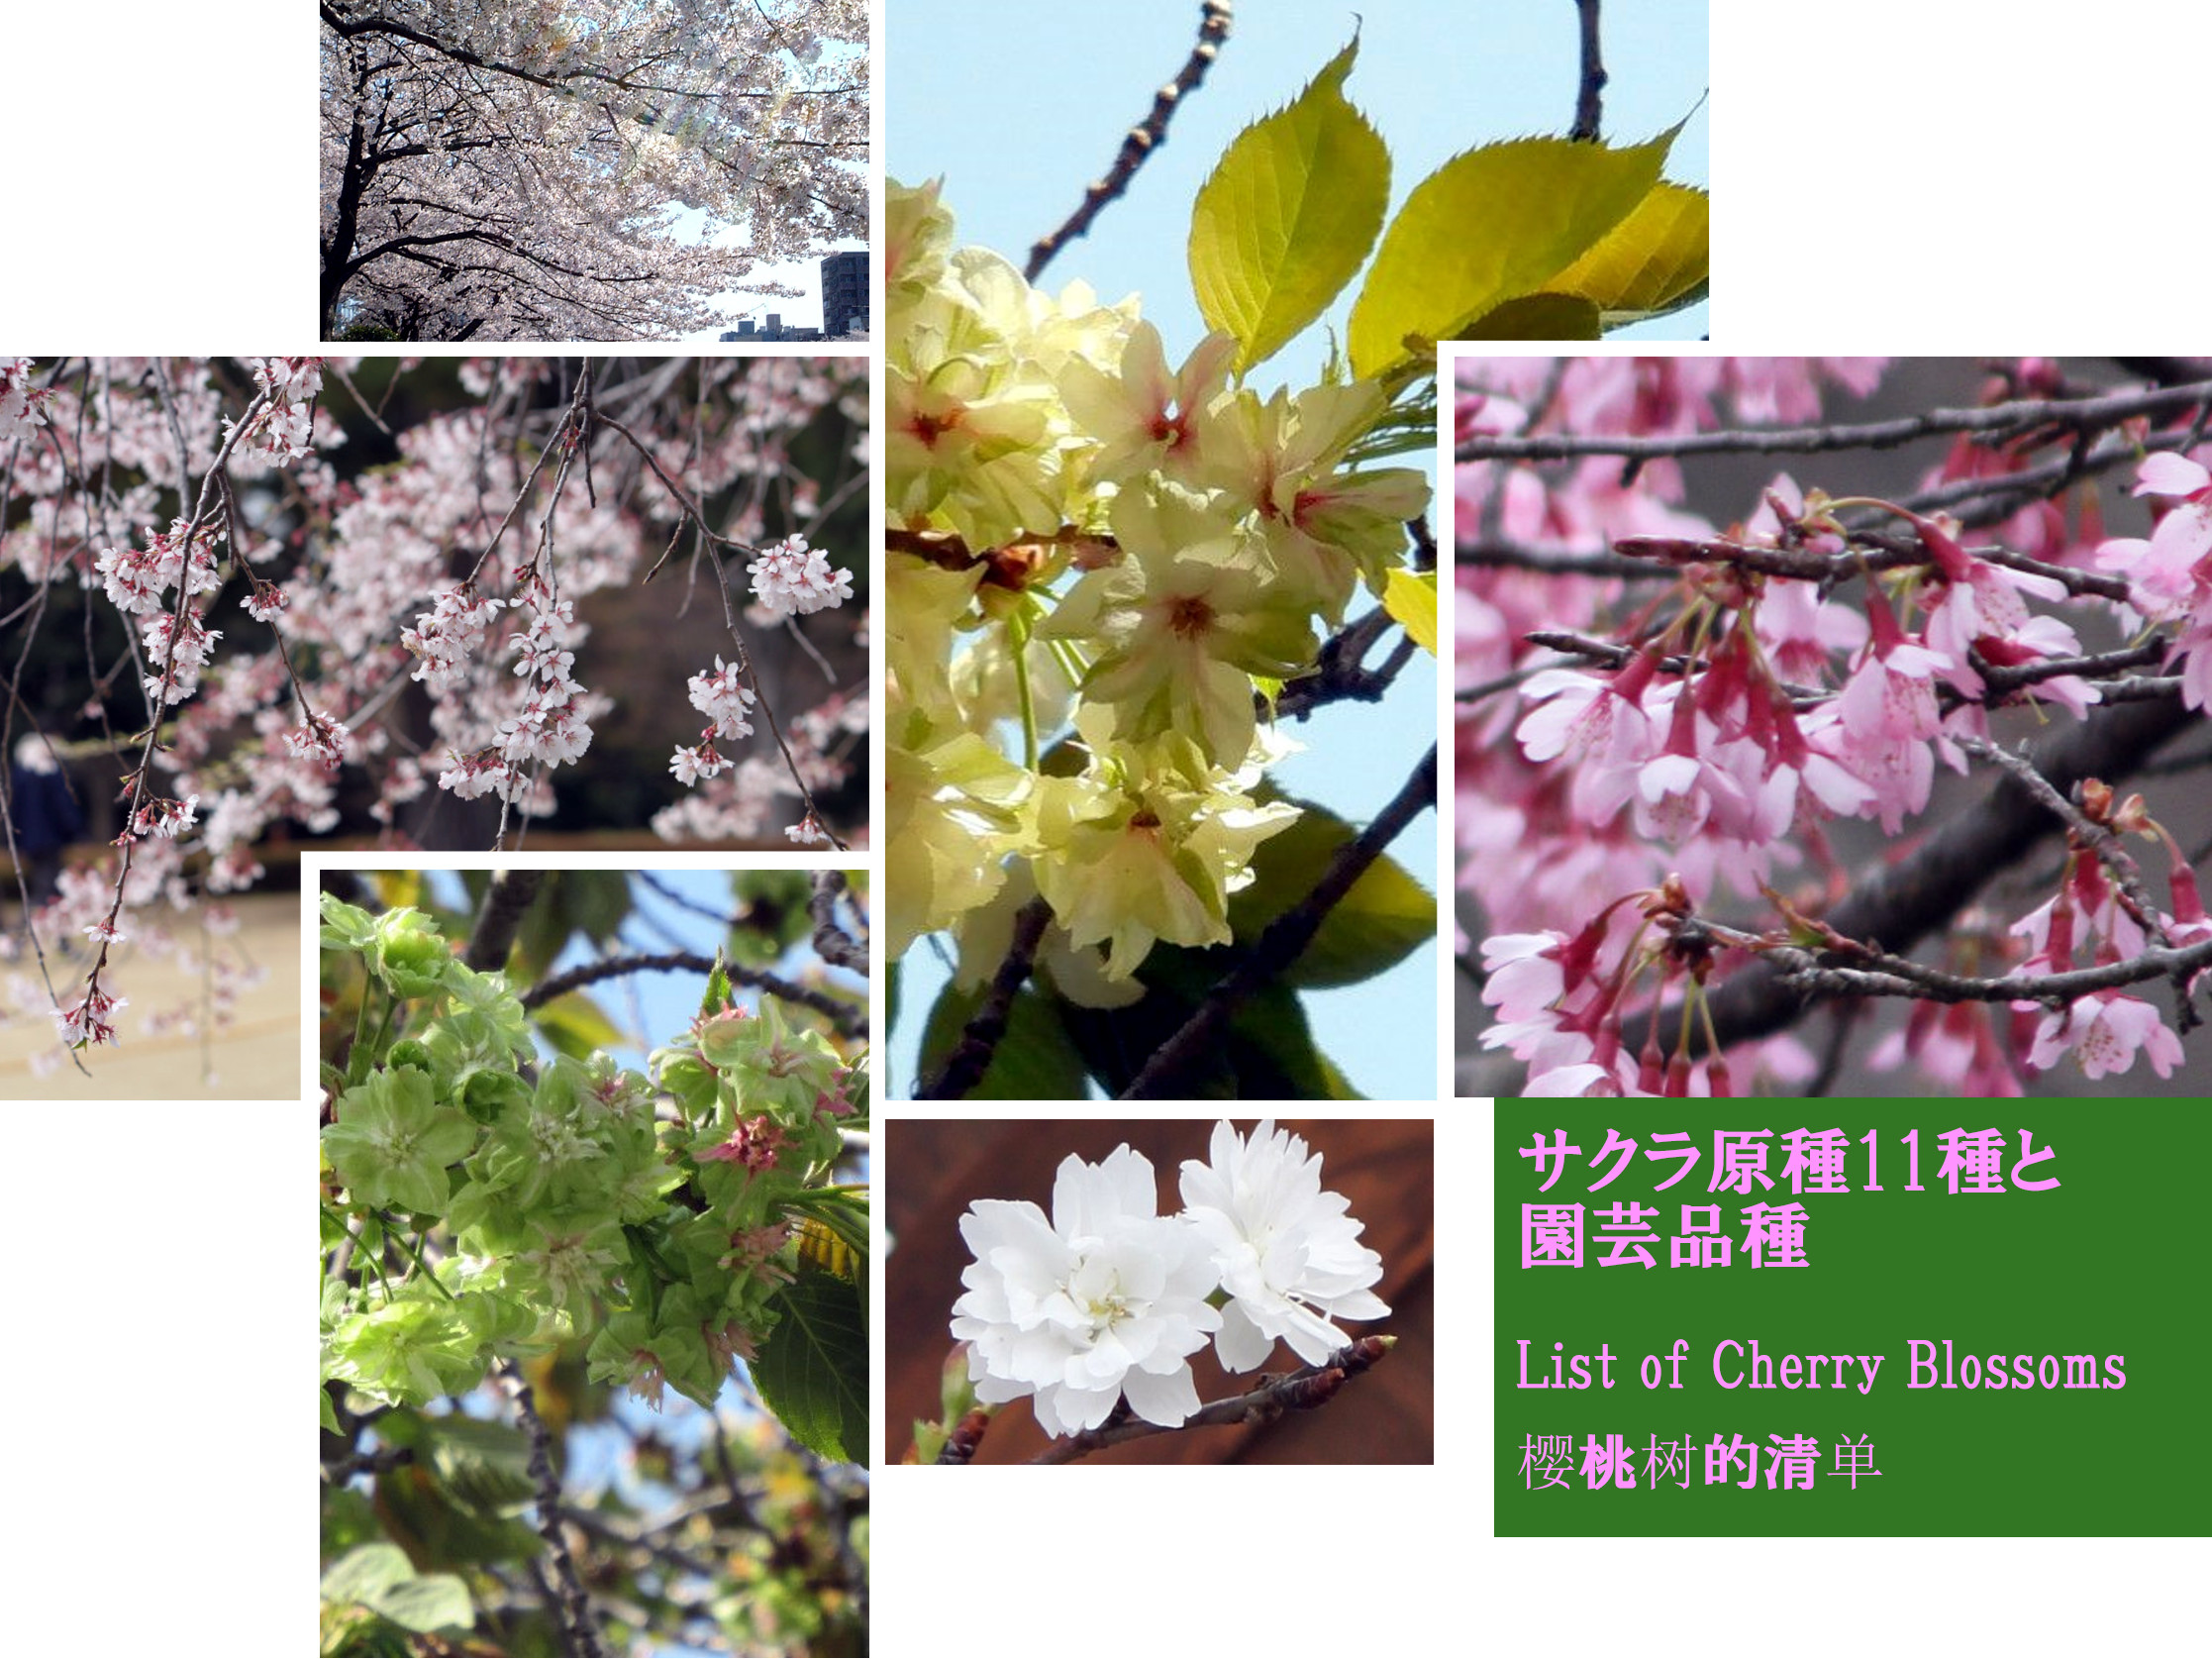 List of Cherry Blossoms